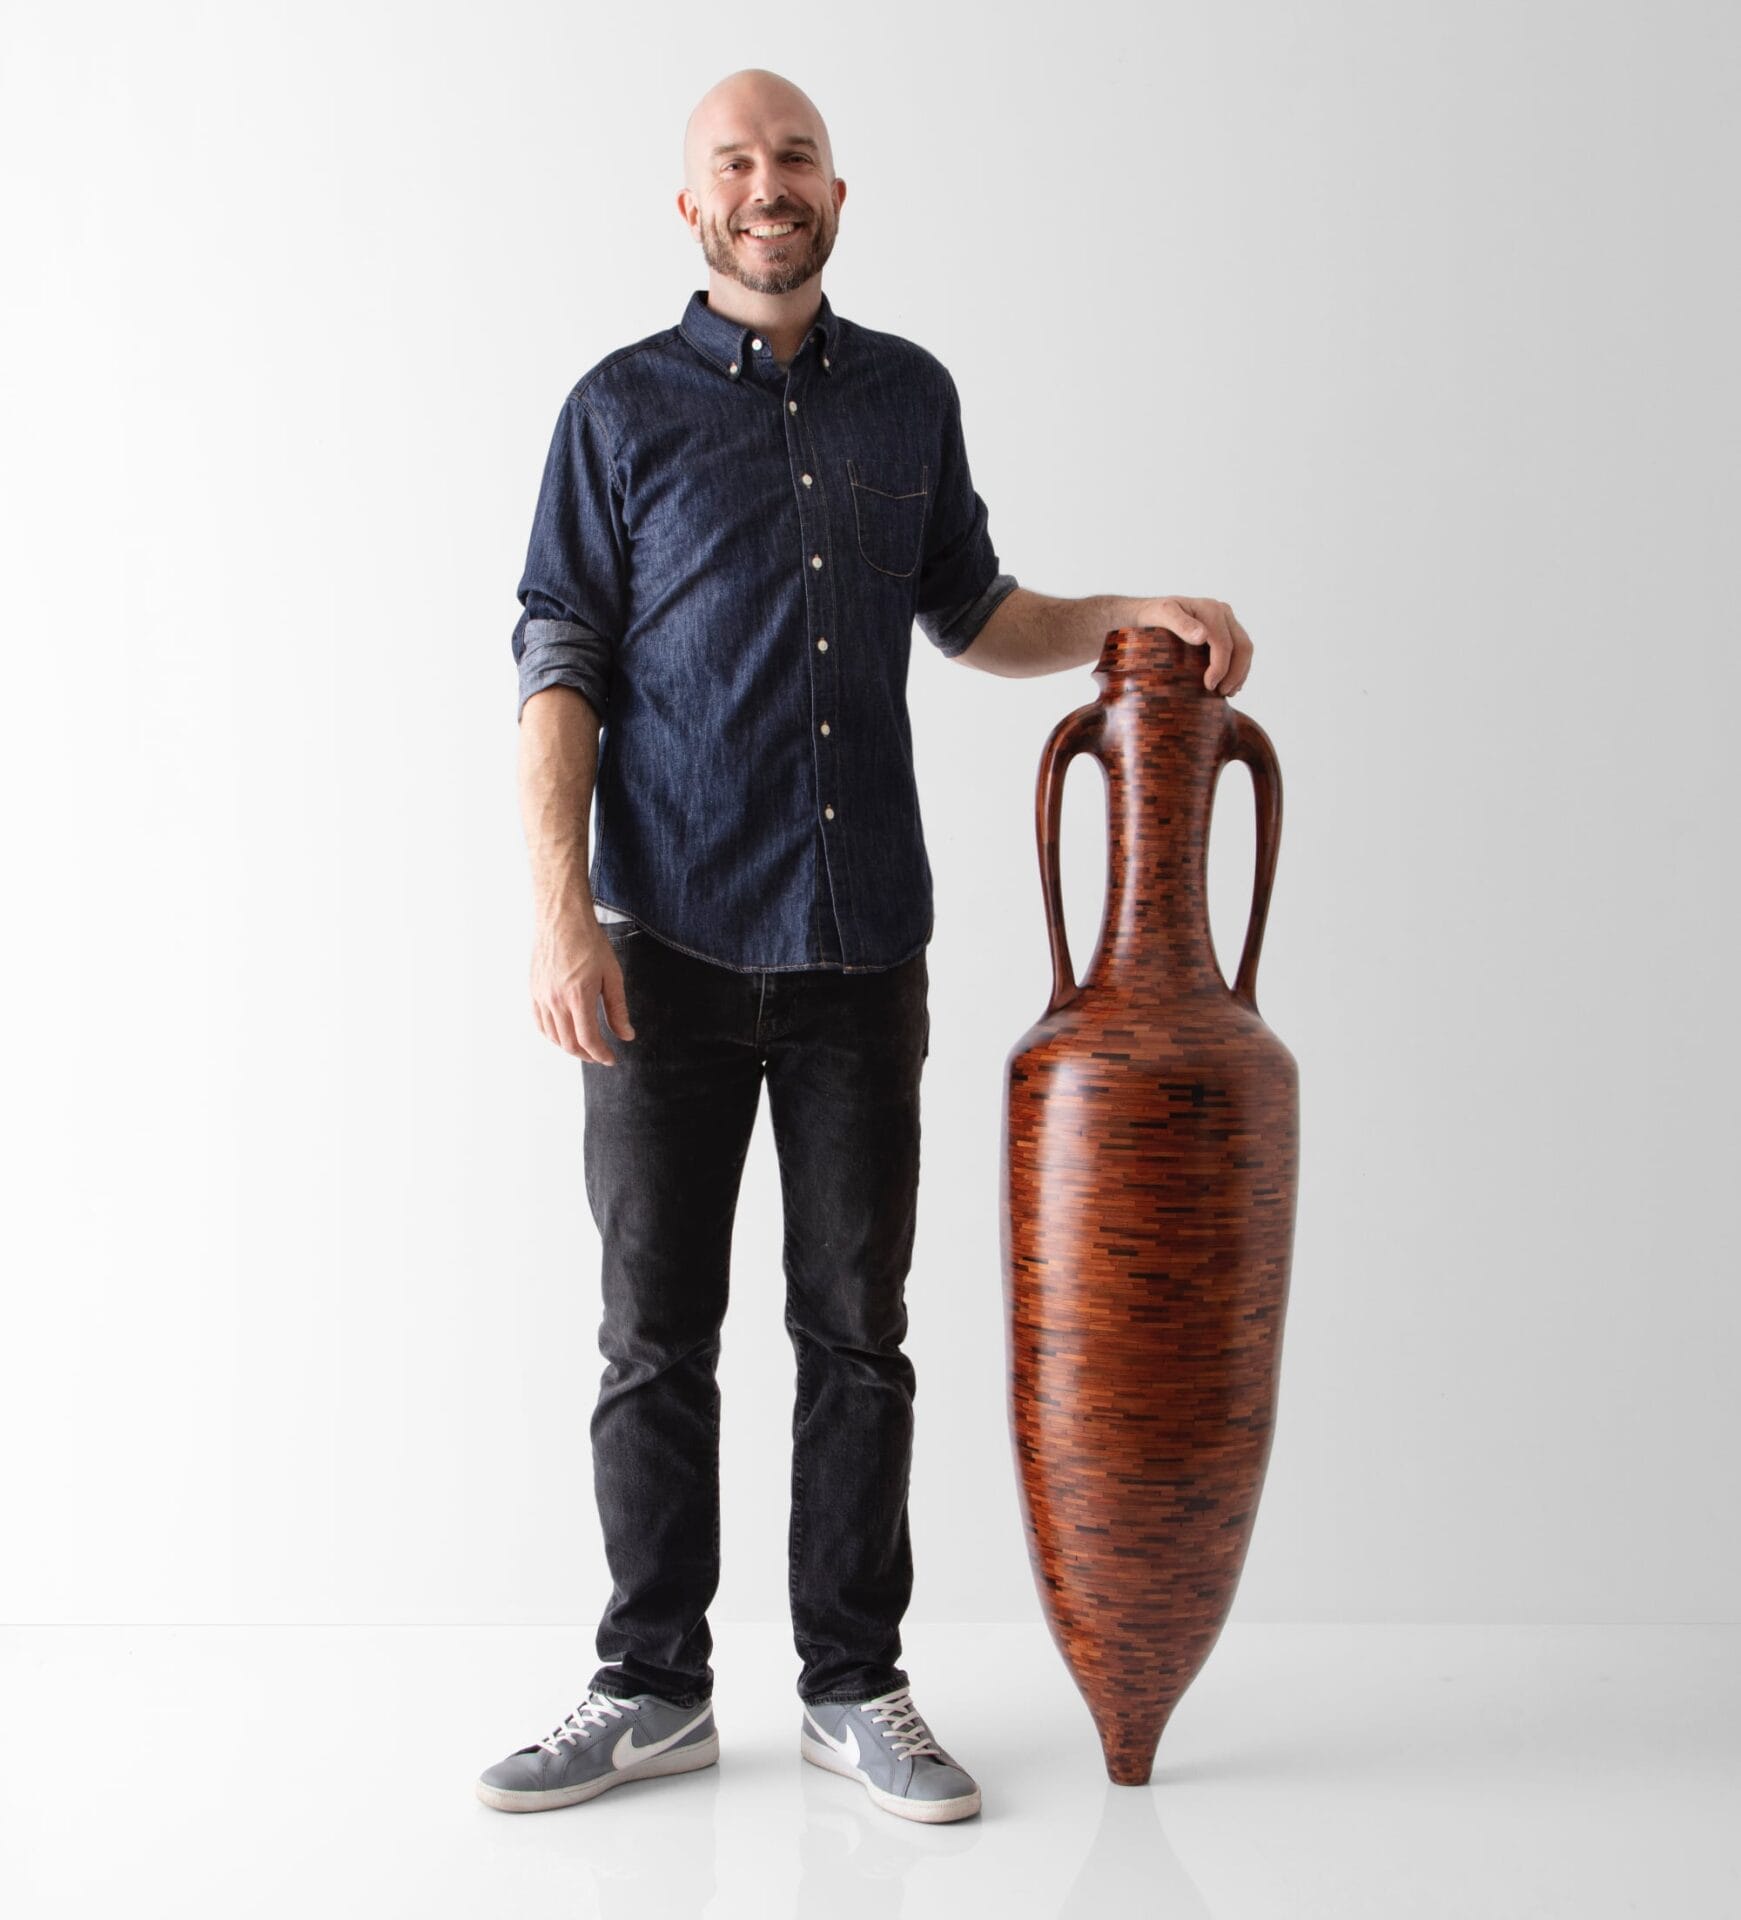 a bald white man in a jean shirt, jeans, and sneakers stands next to a tall wooden amphora